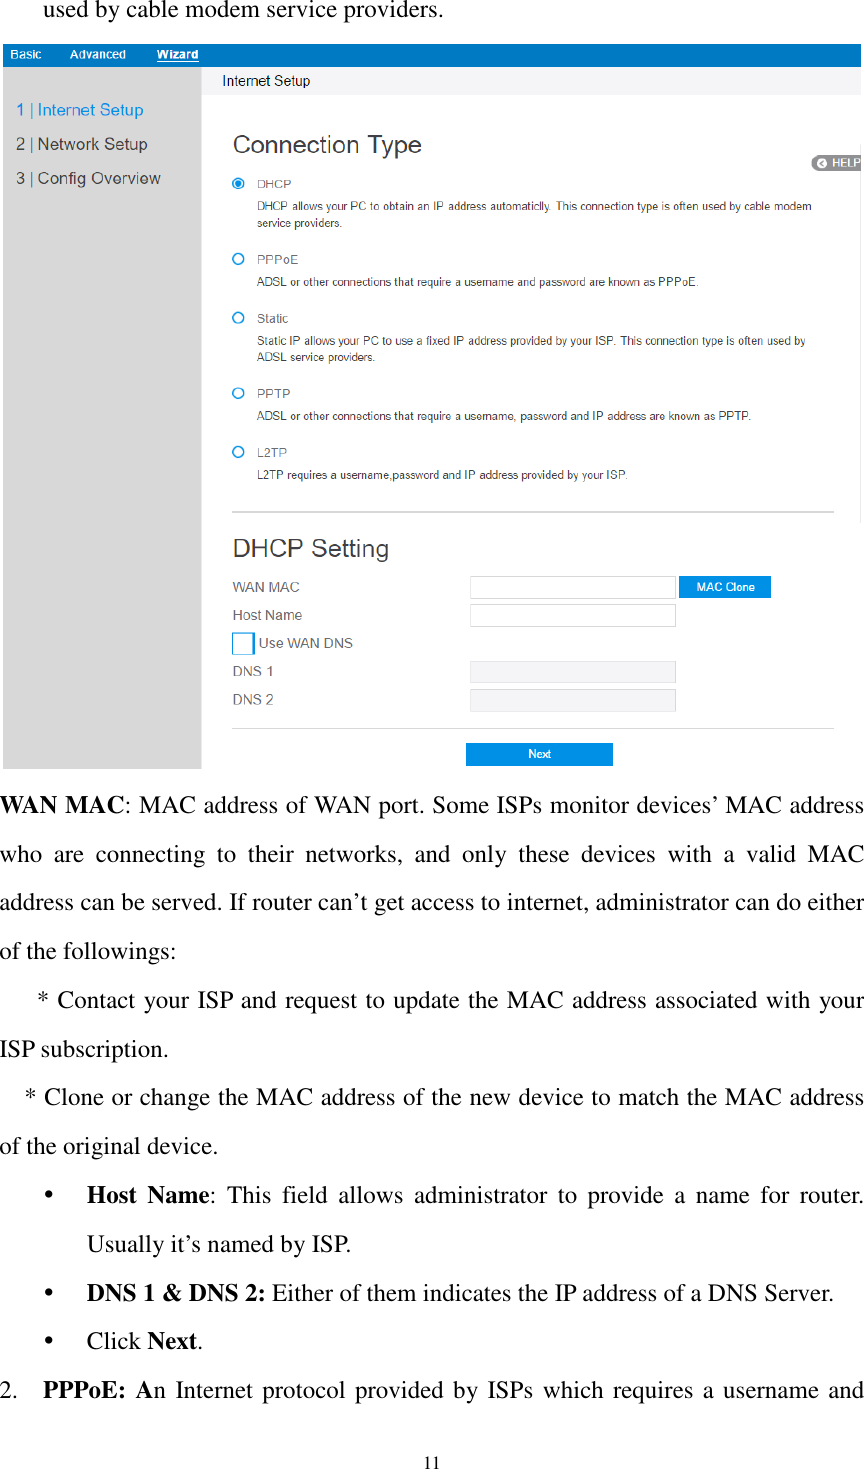  11 used by cable modem service providers.  WAN MAC: MAC address of WAN port. Some ISPs monitor devices’ MAC address who  are  connecting  to  their  networks,  and  only  these  devices  with  a  valid  MAC address can be served. If router can’t get access to internet, administrator can do either of the followings:   * Contact your ISP and request to update the MAC address associated with your ISP subscription.   * Clone or change the MAC address of the new device to match the MAC address of the original device.  Host  Name:  This  field  allows  administrator  to  provide  a  name  for  router. Usually it’s named by ISP.    DNS 1 &amp; DNS 2: Either of them indicates the IP address of a DNS Server.    Click Next. 2. PPPoE: An Internet protocol provided by ISPs which requires a username and 